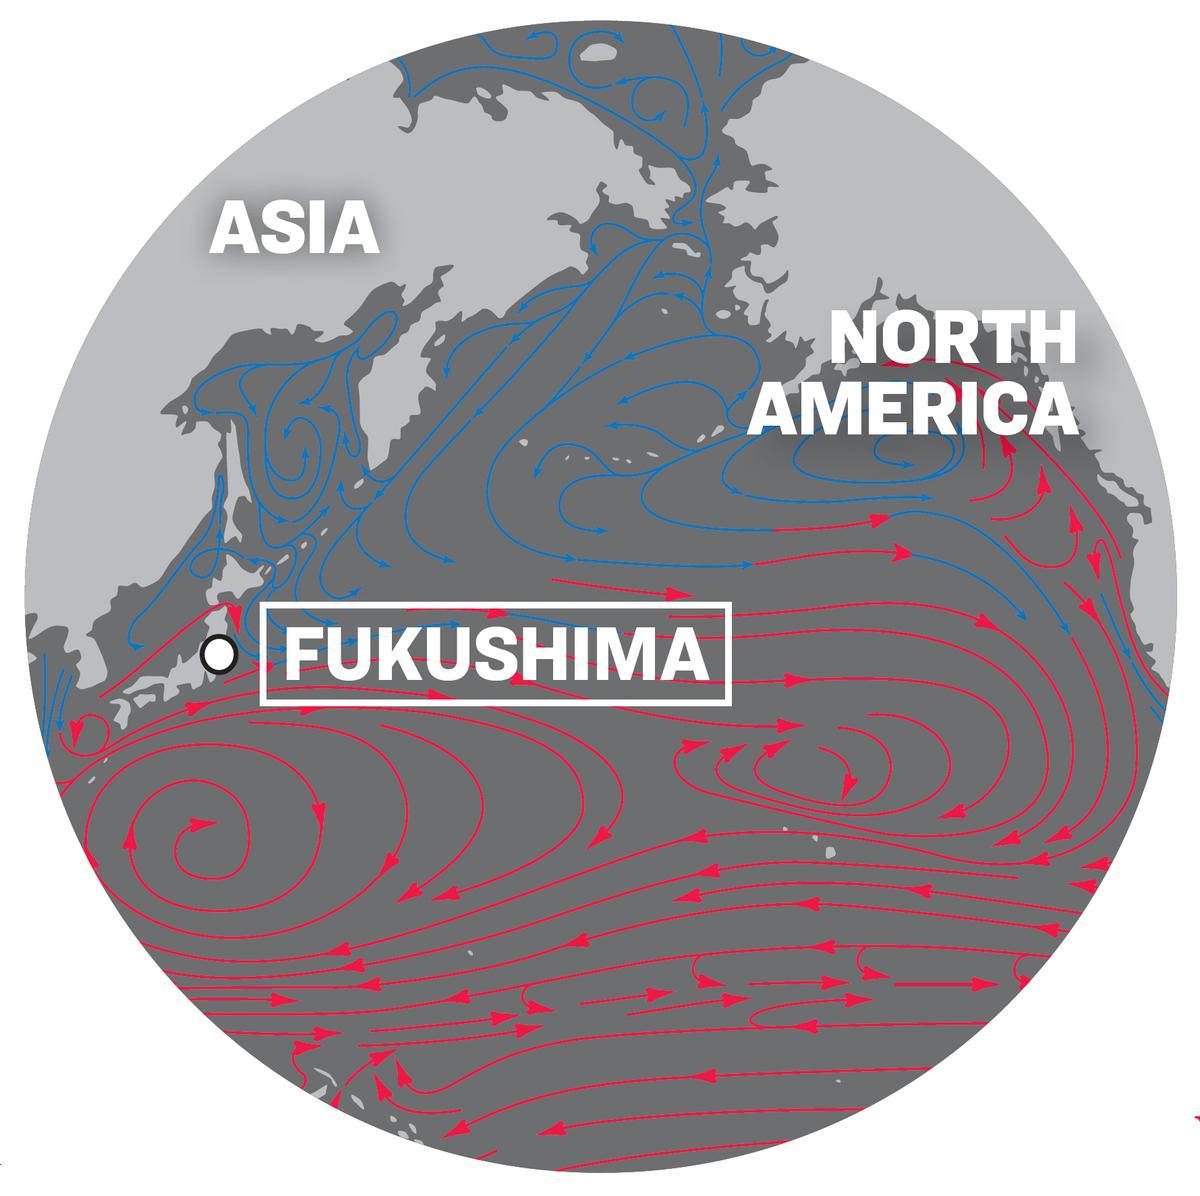 A map showing the location of the Fukushima Daiichi nuclear power plant and water currents in the Pacific Ocean. (SHUTTERSTOCK (BASE MAP); THE EPOCH TIMES (DESIGN))